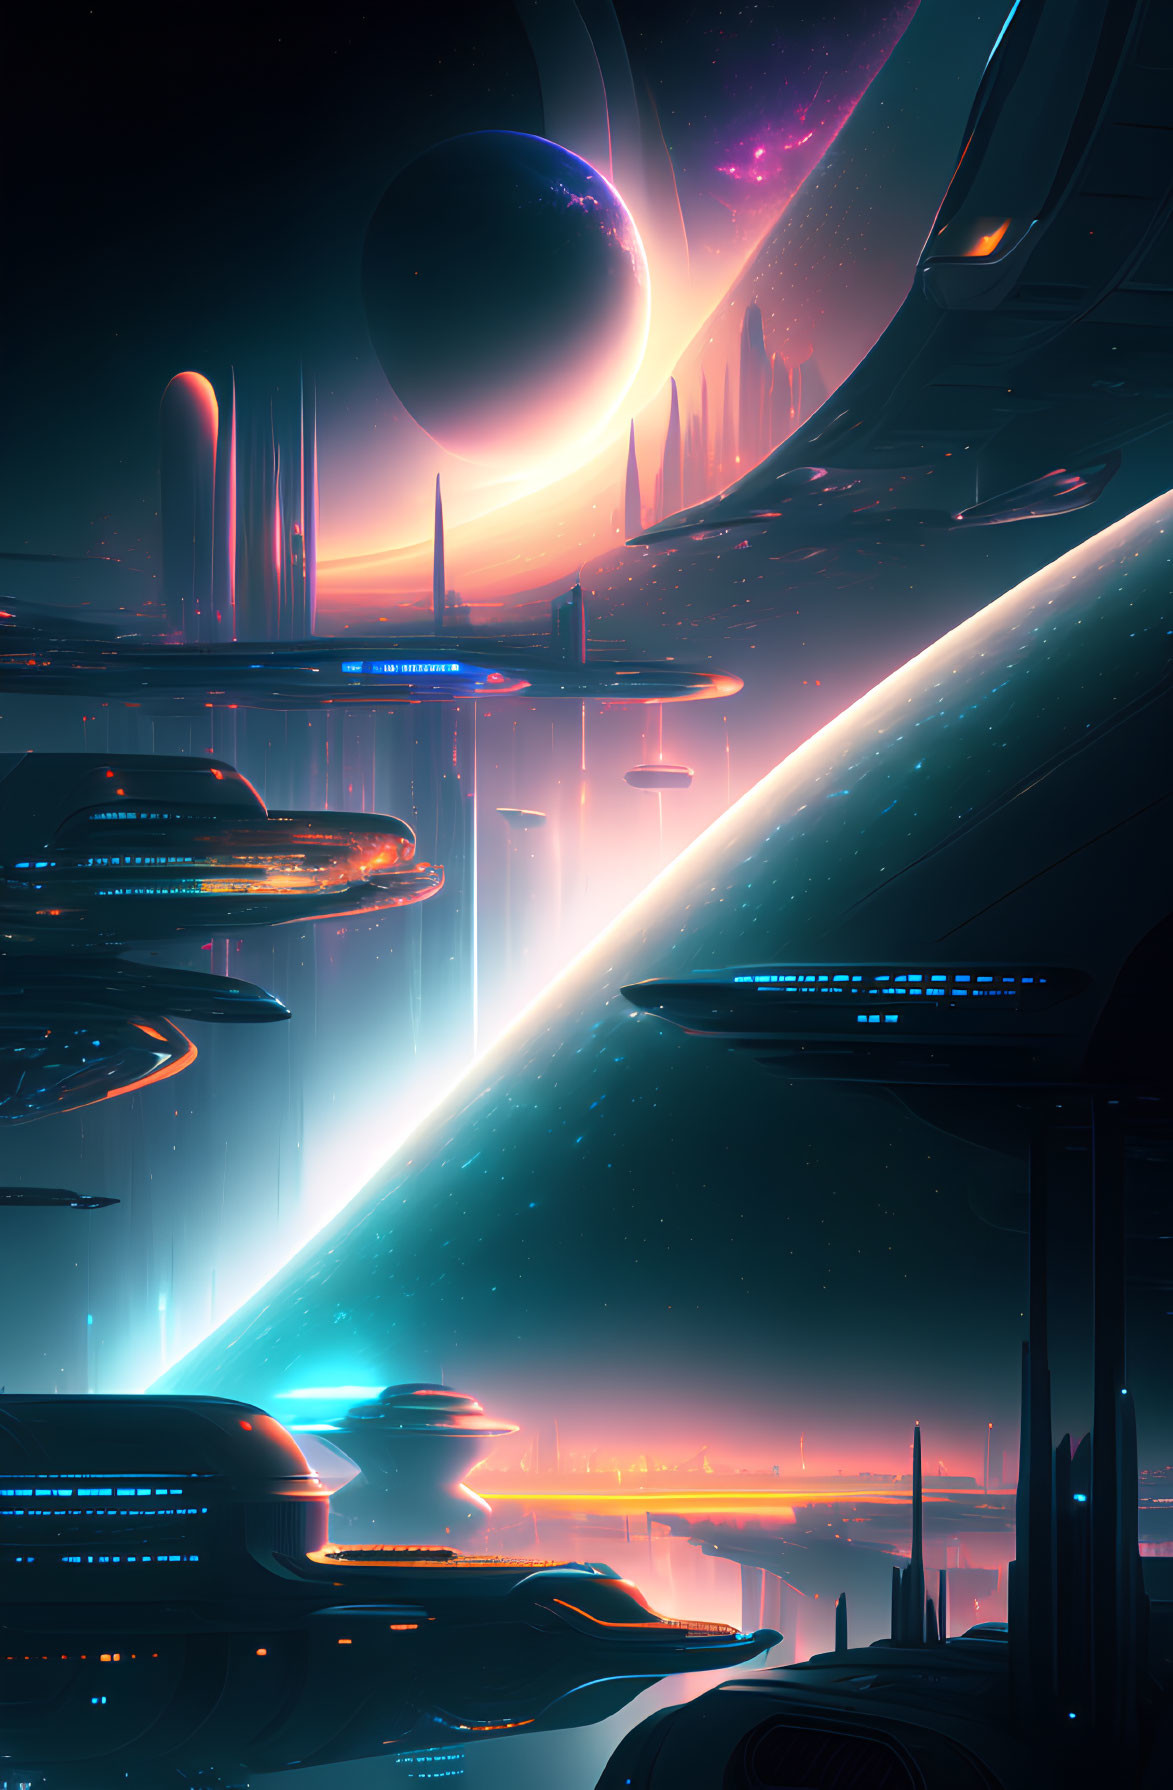 Futuristic cityscape with towering skyscrapers and large planet in the background